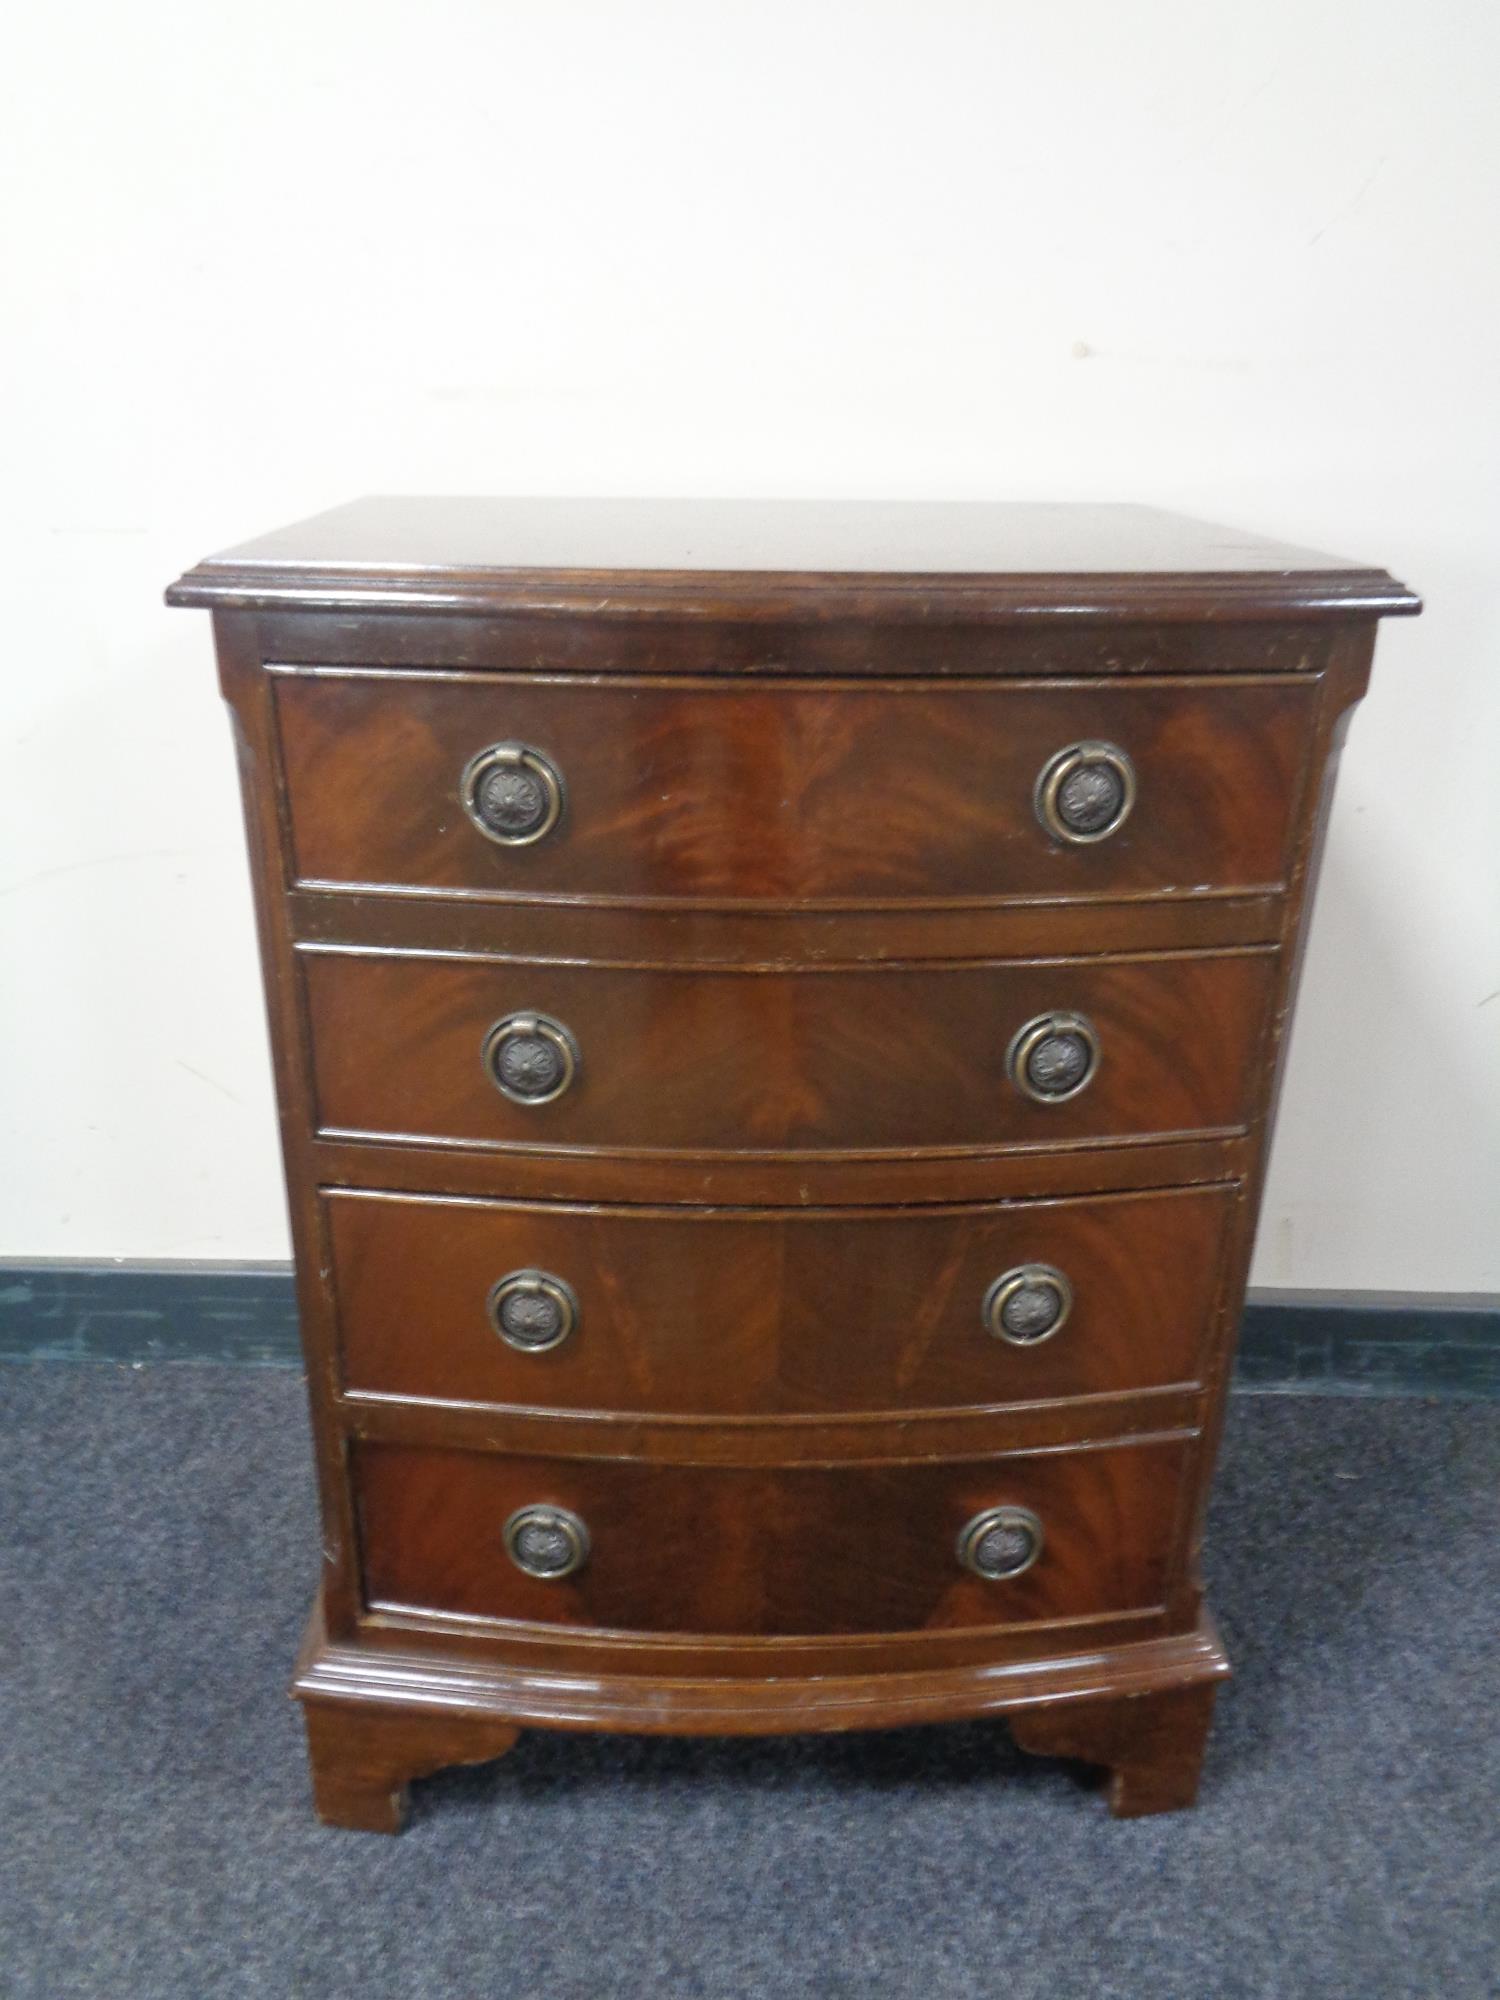 A mahogany Georgian style bow fronted four drawer chest.